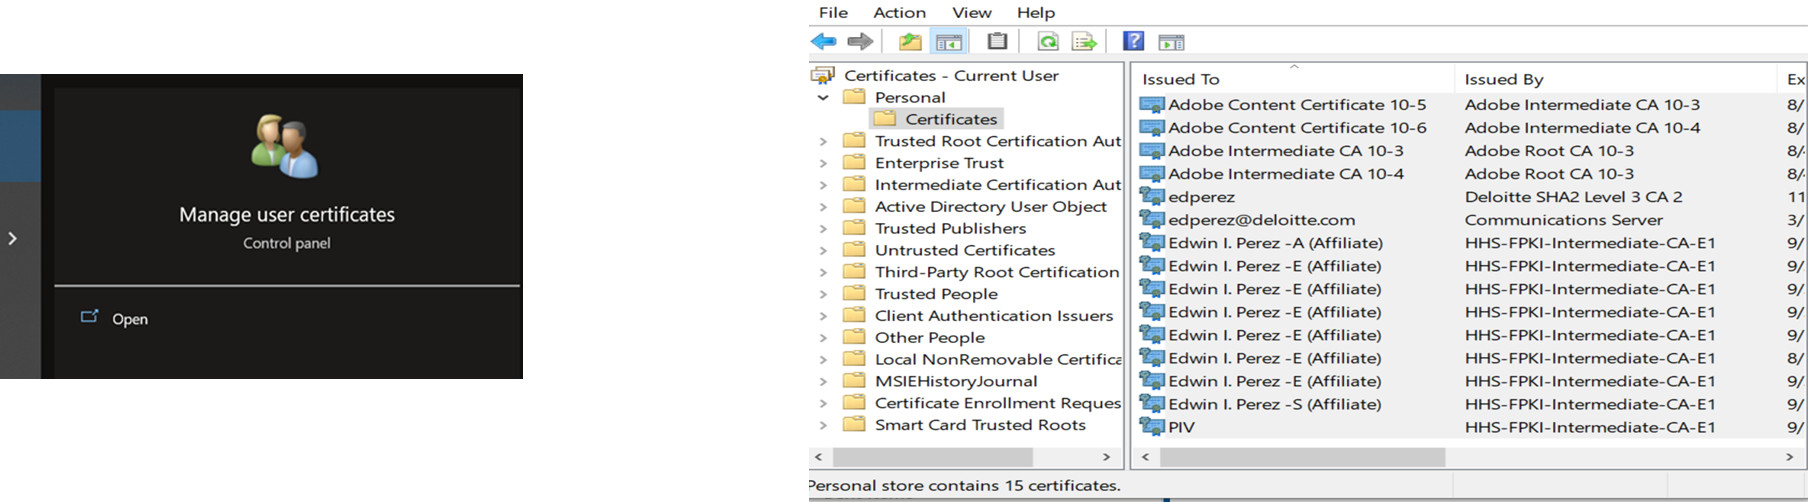 How to Clear Certificate Cache